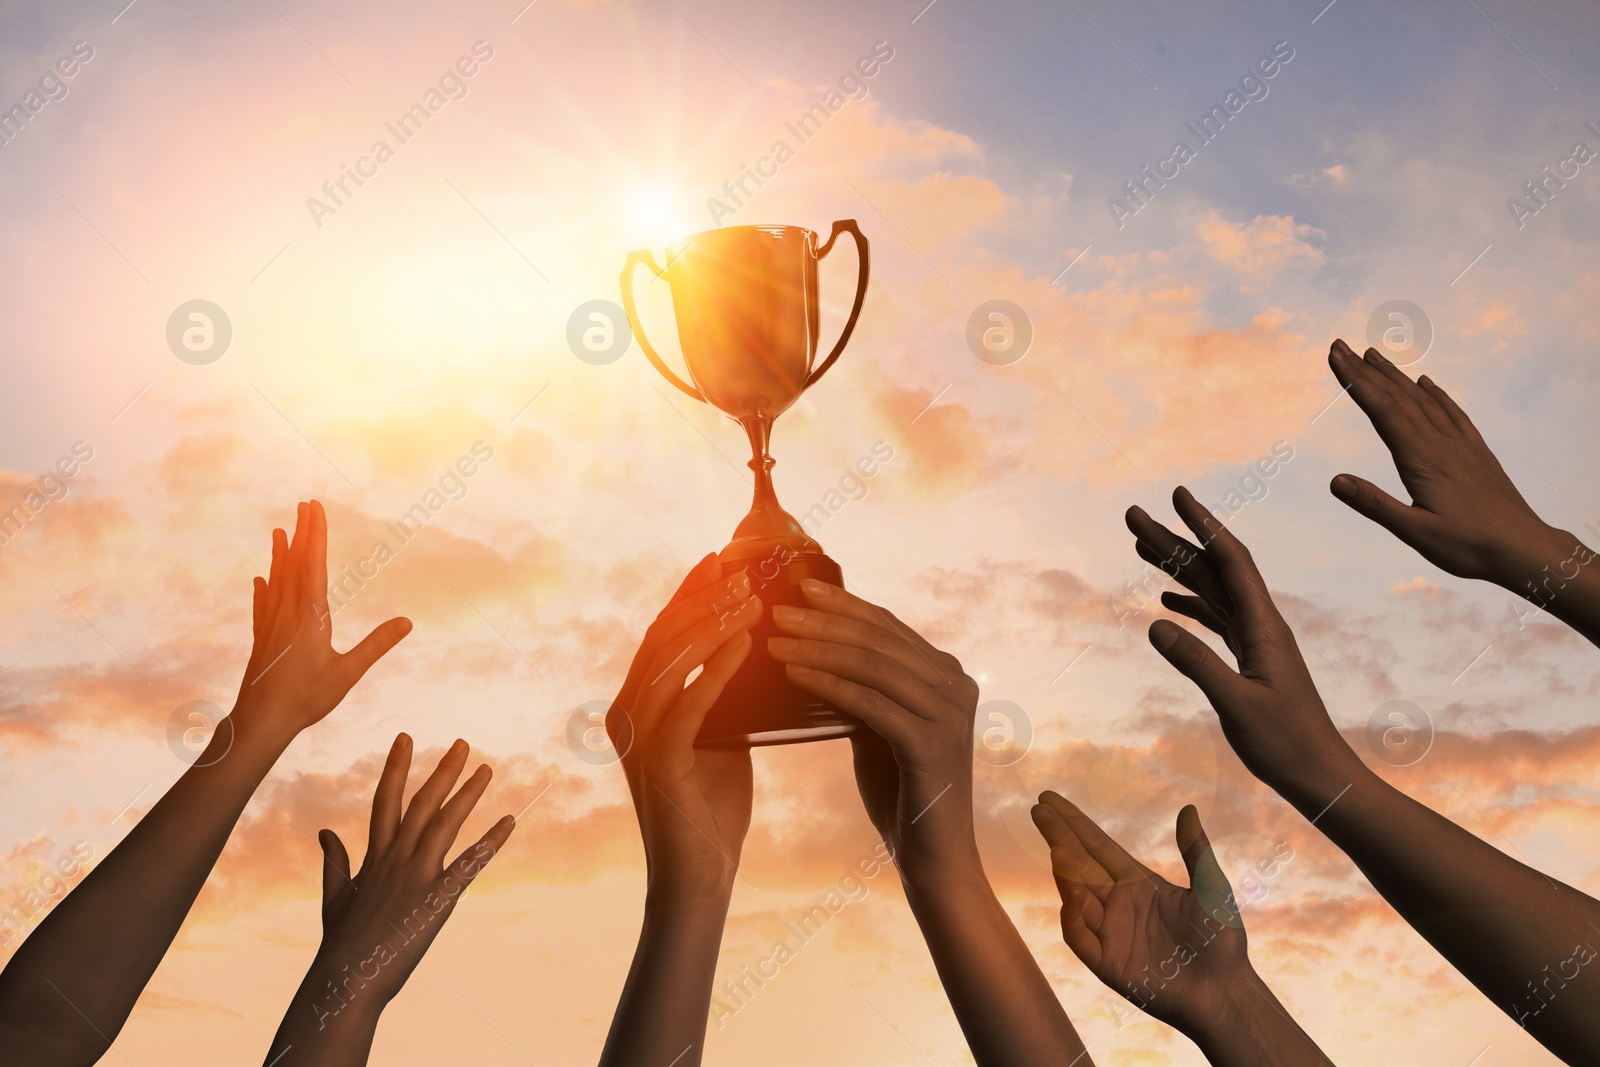 Image of Winning team with gold trophy cup against shining sun in sky 